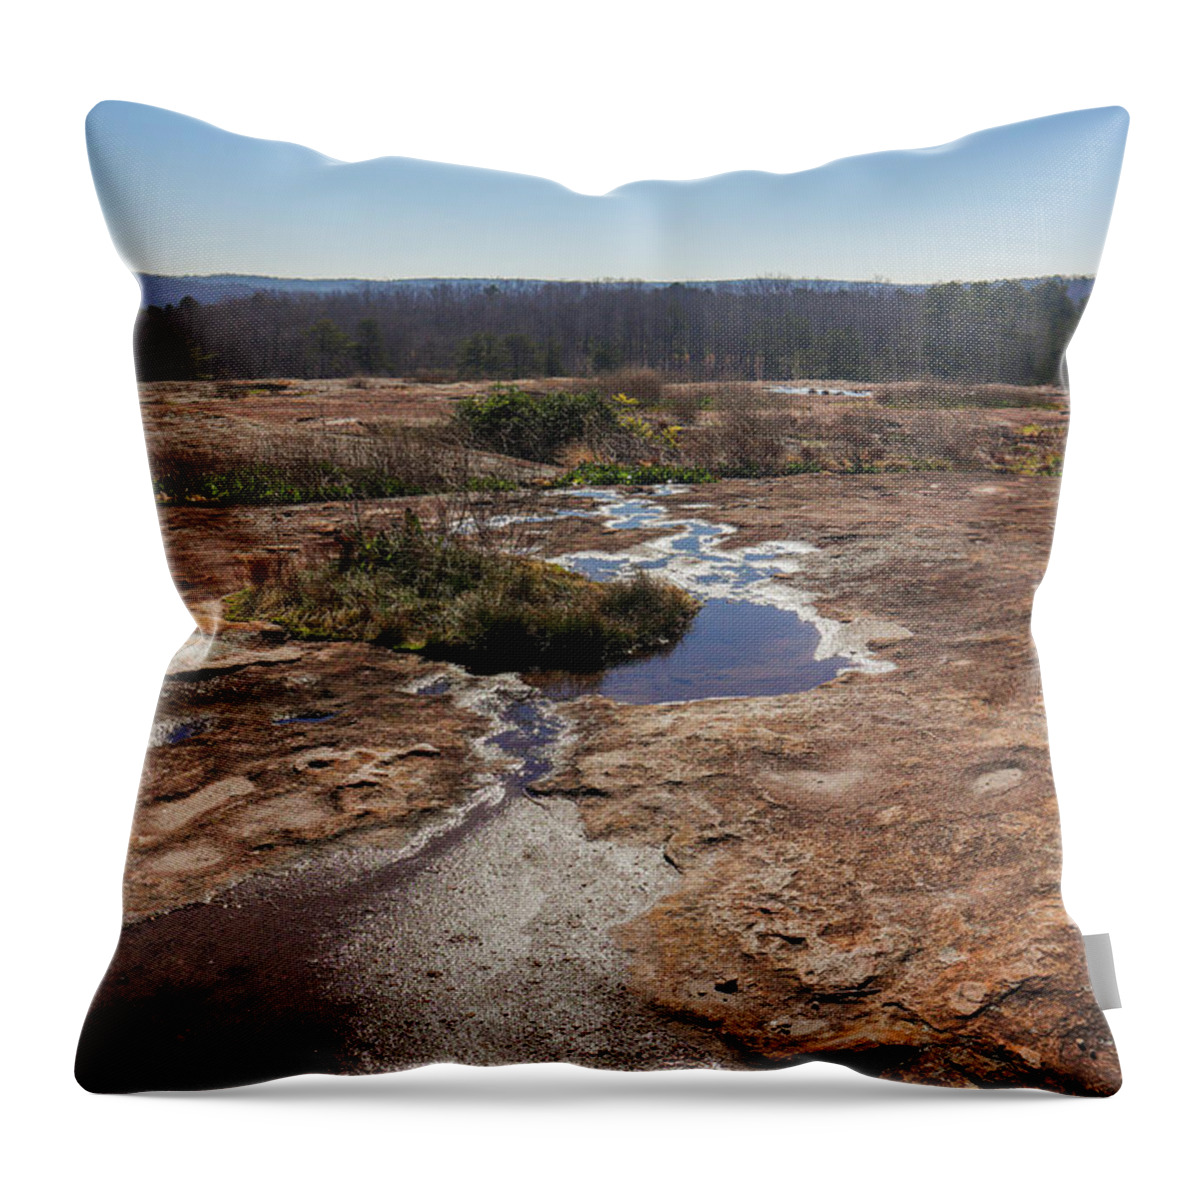 Arabia Mountain Throw Pillow featuring the photograph Down The Mountain Blues by Ed Williams